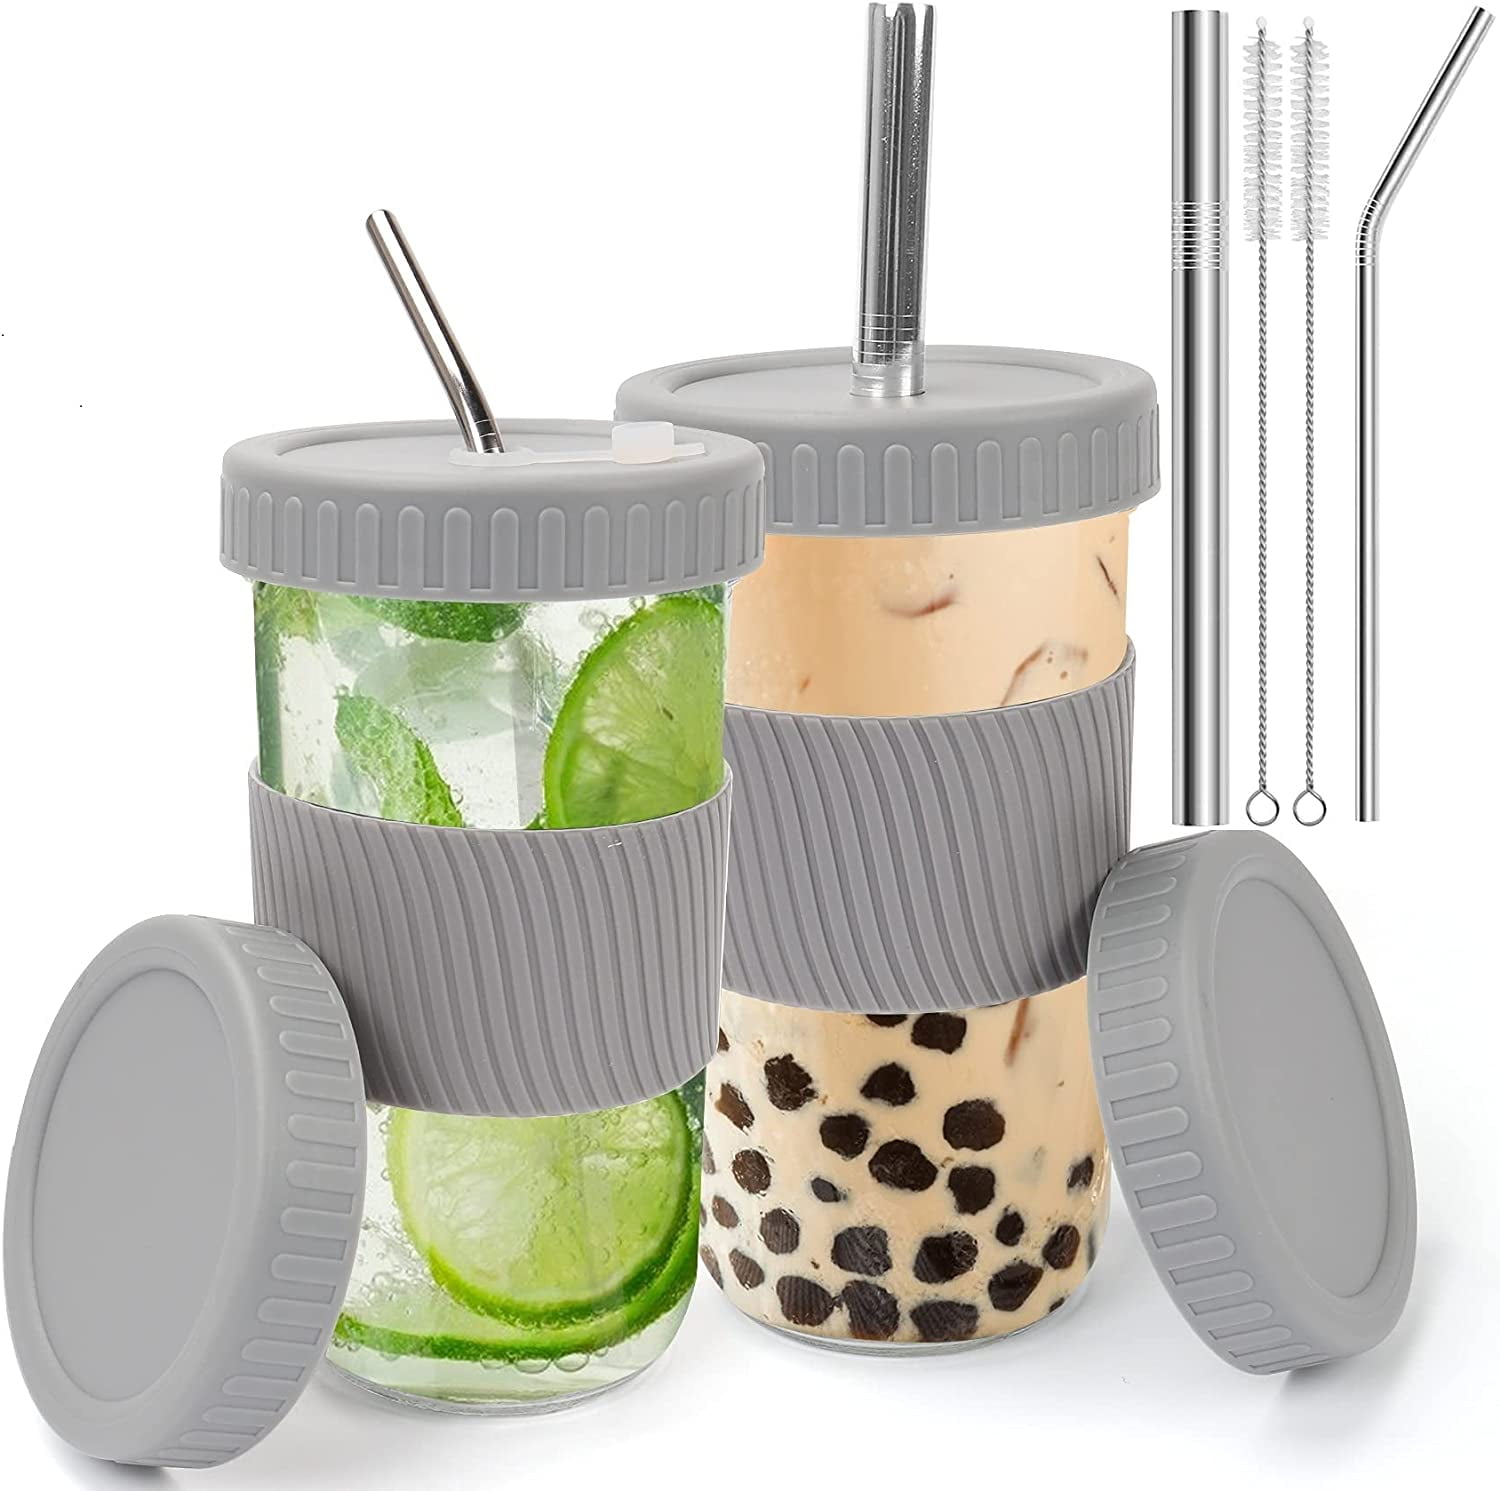 QKTYB Drinking Glasses Reusable Mason Jar Cups with 2 Lids and Straws Cleaning Brush Wide Mouth Bubble Tea Cup Travel Mug Glass Tumbler Mason Jar Sippy Cup for Boba Tea Smoothie Juices Jam Green